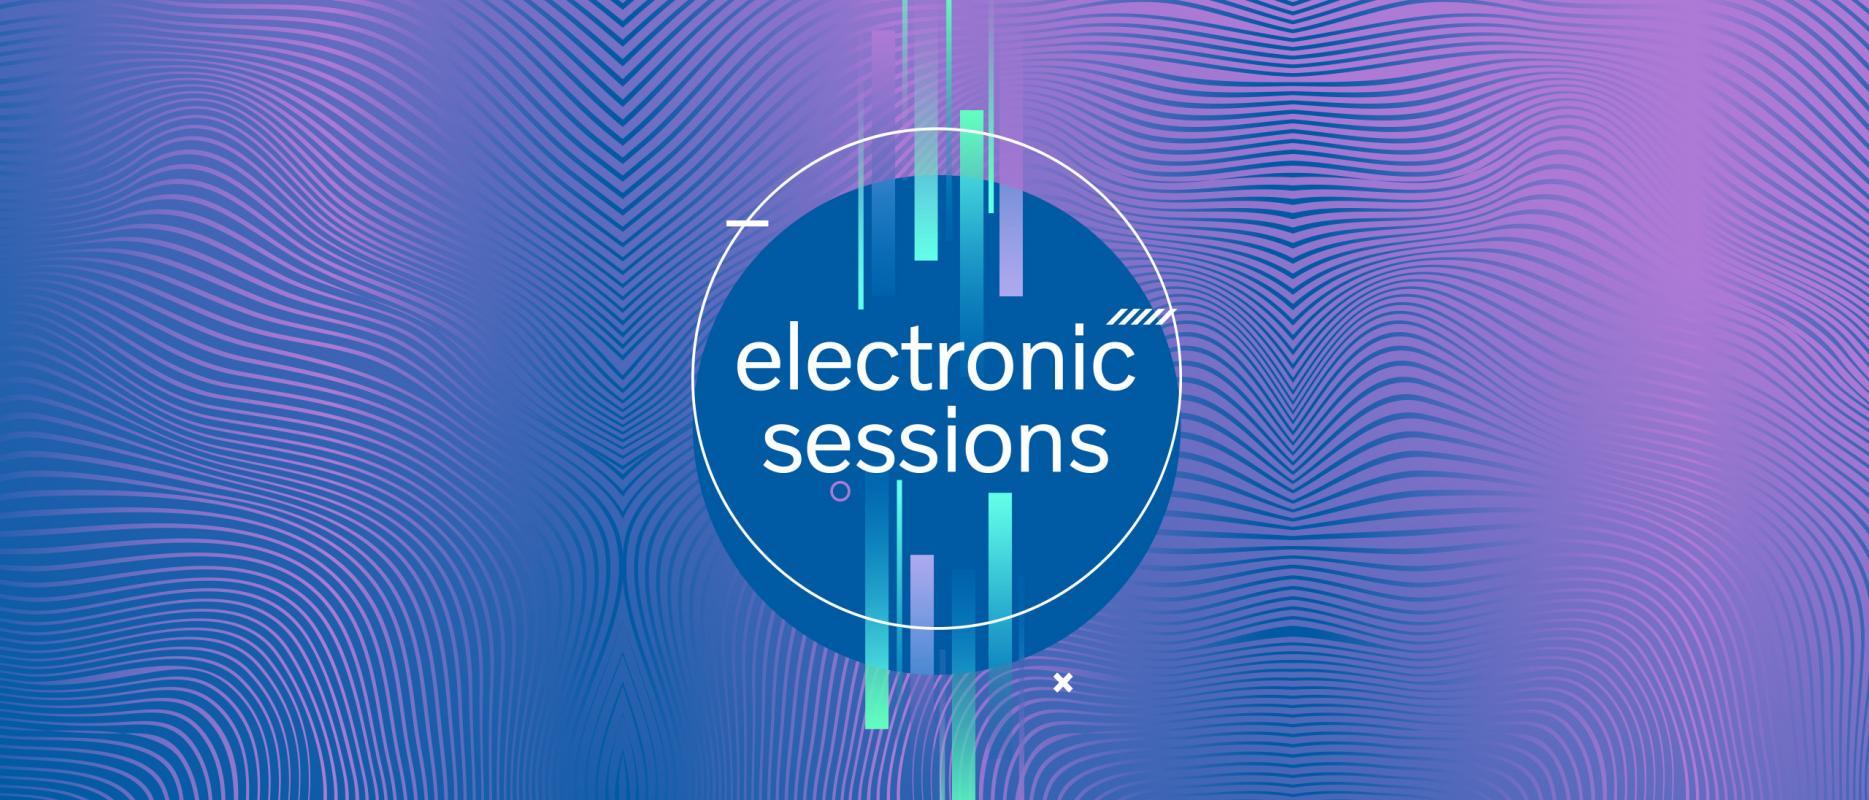 Electronic Sessions | Aperitivo con DJ Set by Frank Sinutre